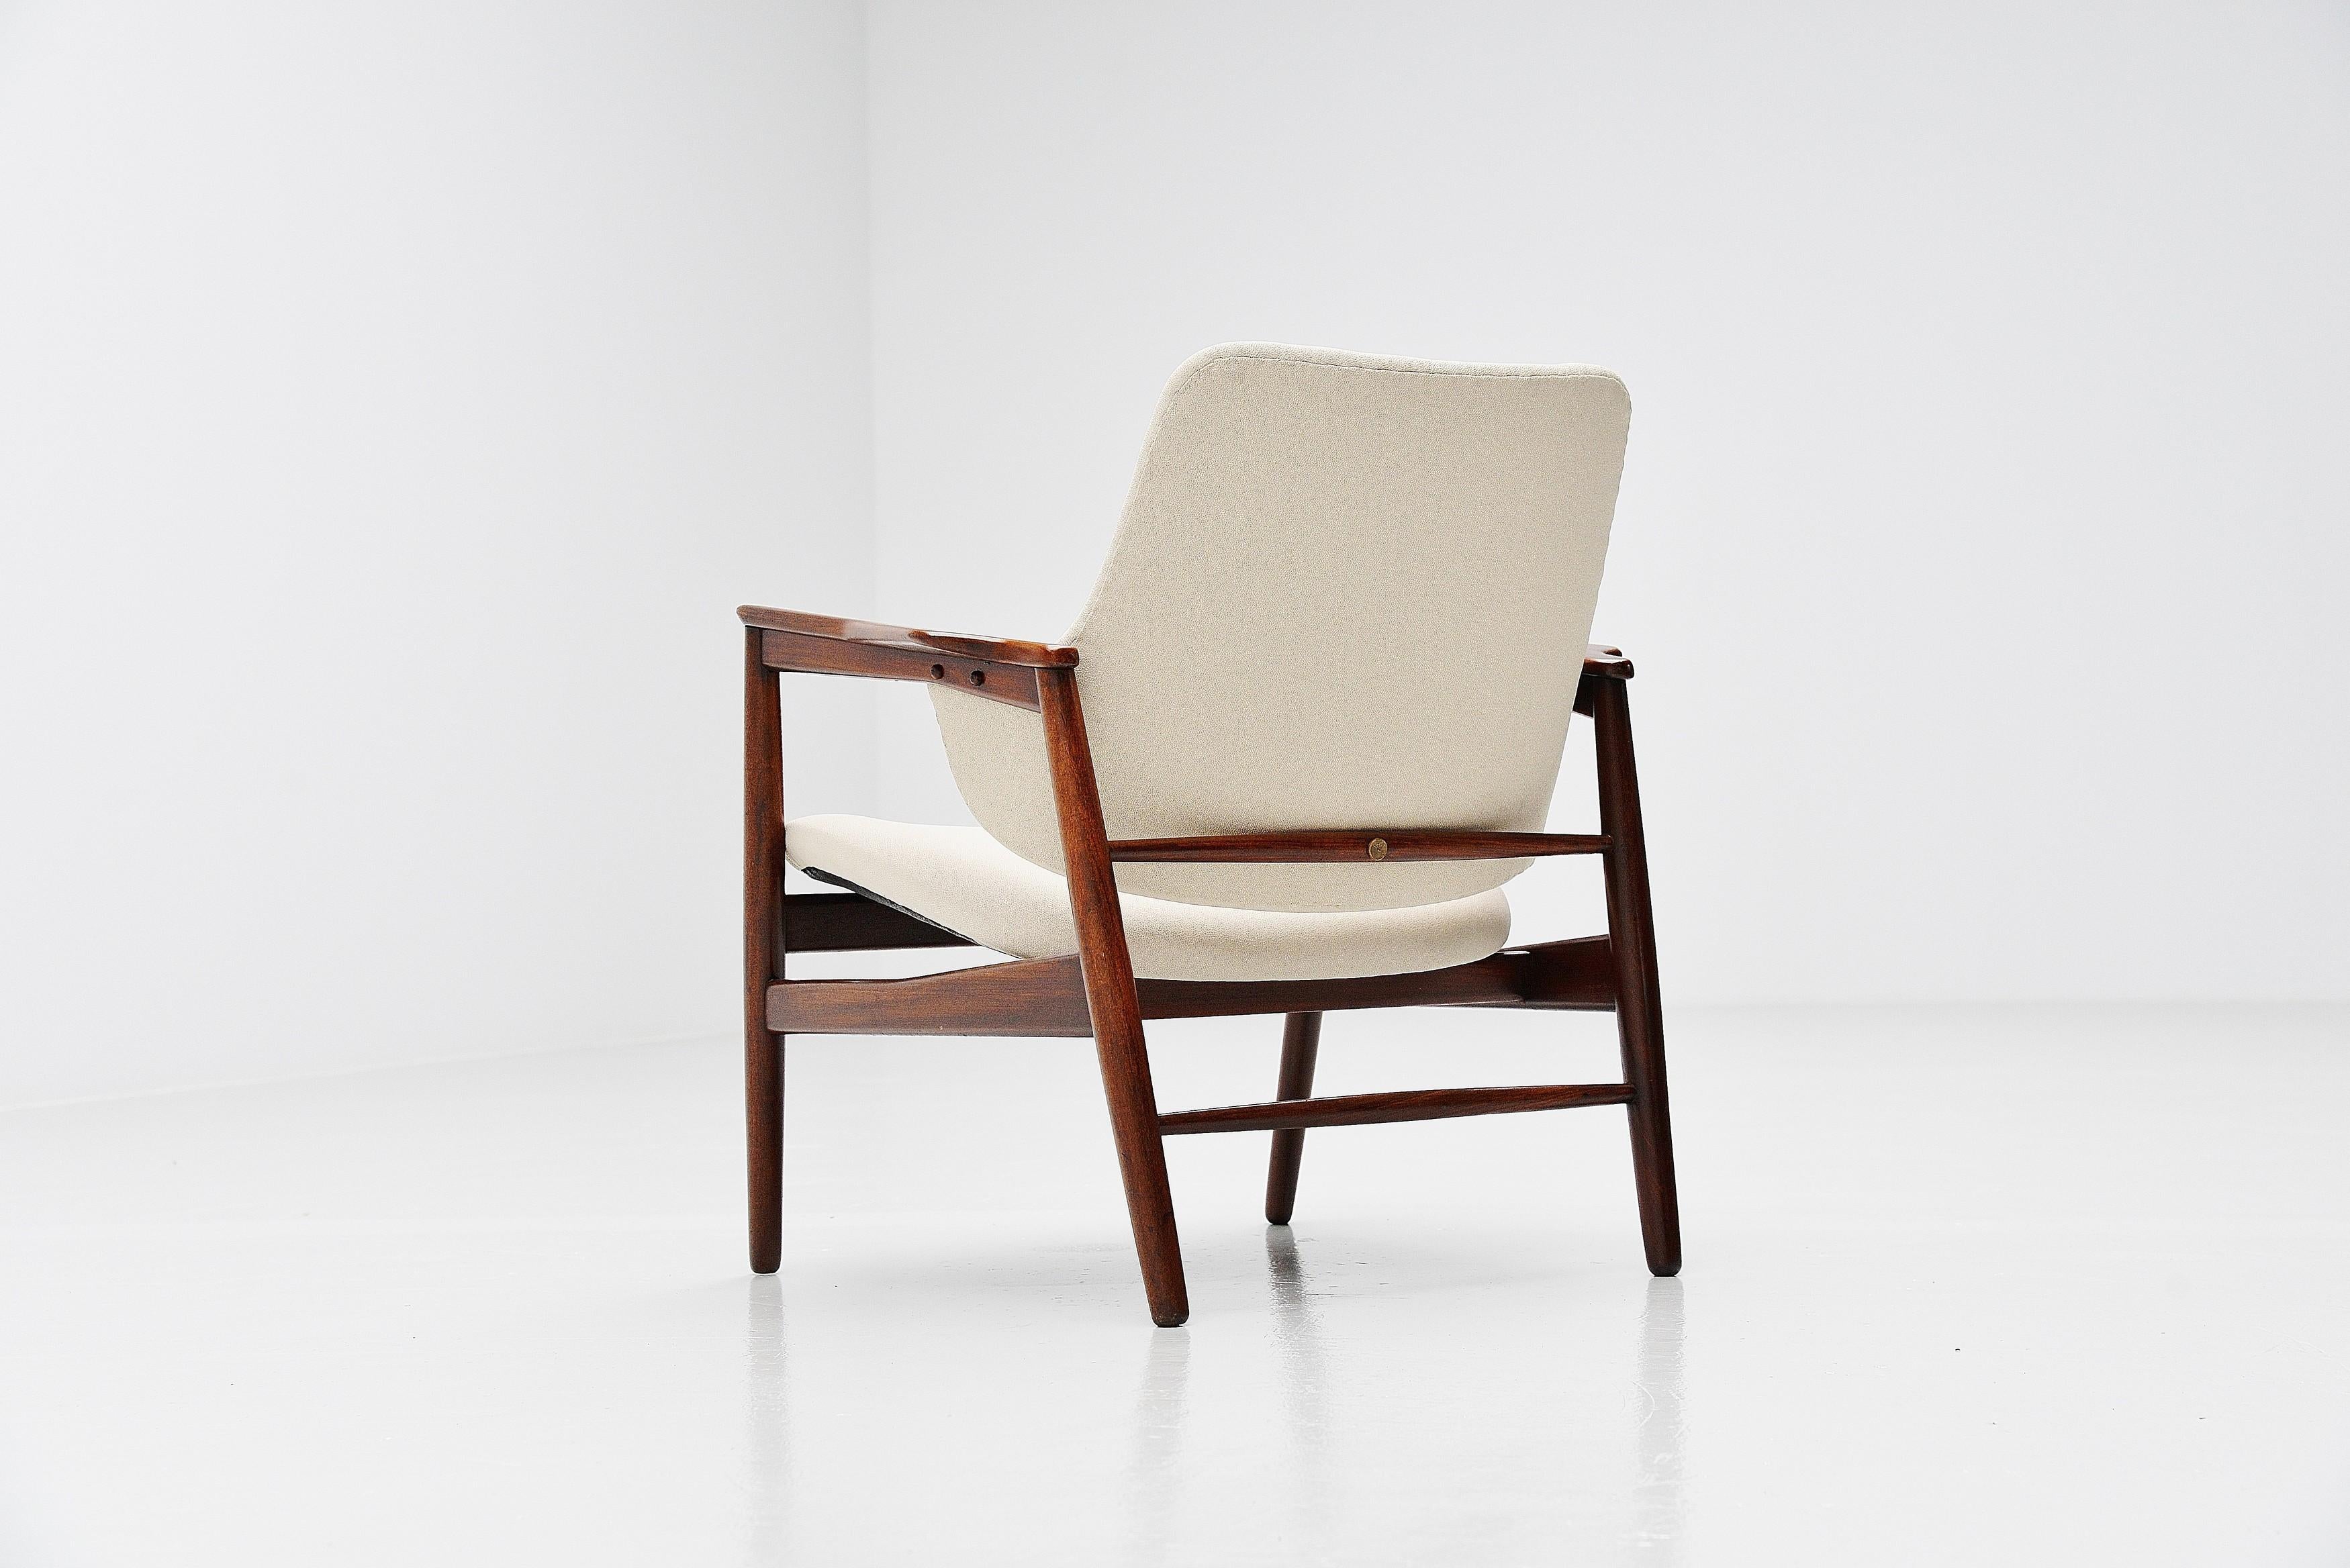 Super rare and beautiful easy chair designed by Ib Kofod-Larsen and manufactured by Christensen & Larsen Cabinetmakers, Denmark, 1953. This chair has a solid teak frame and is newly upholstered with beige fabric from Gabriel. The chair is a real